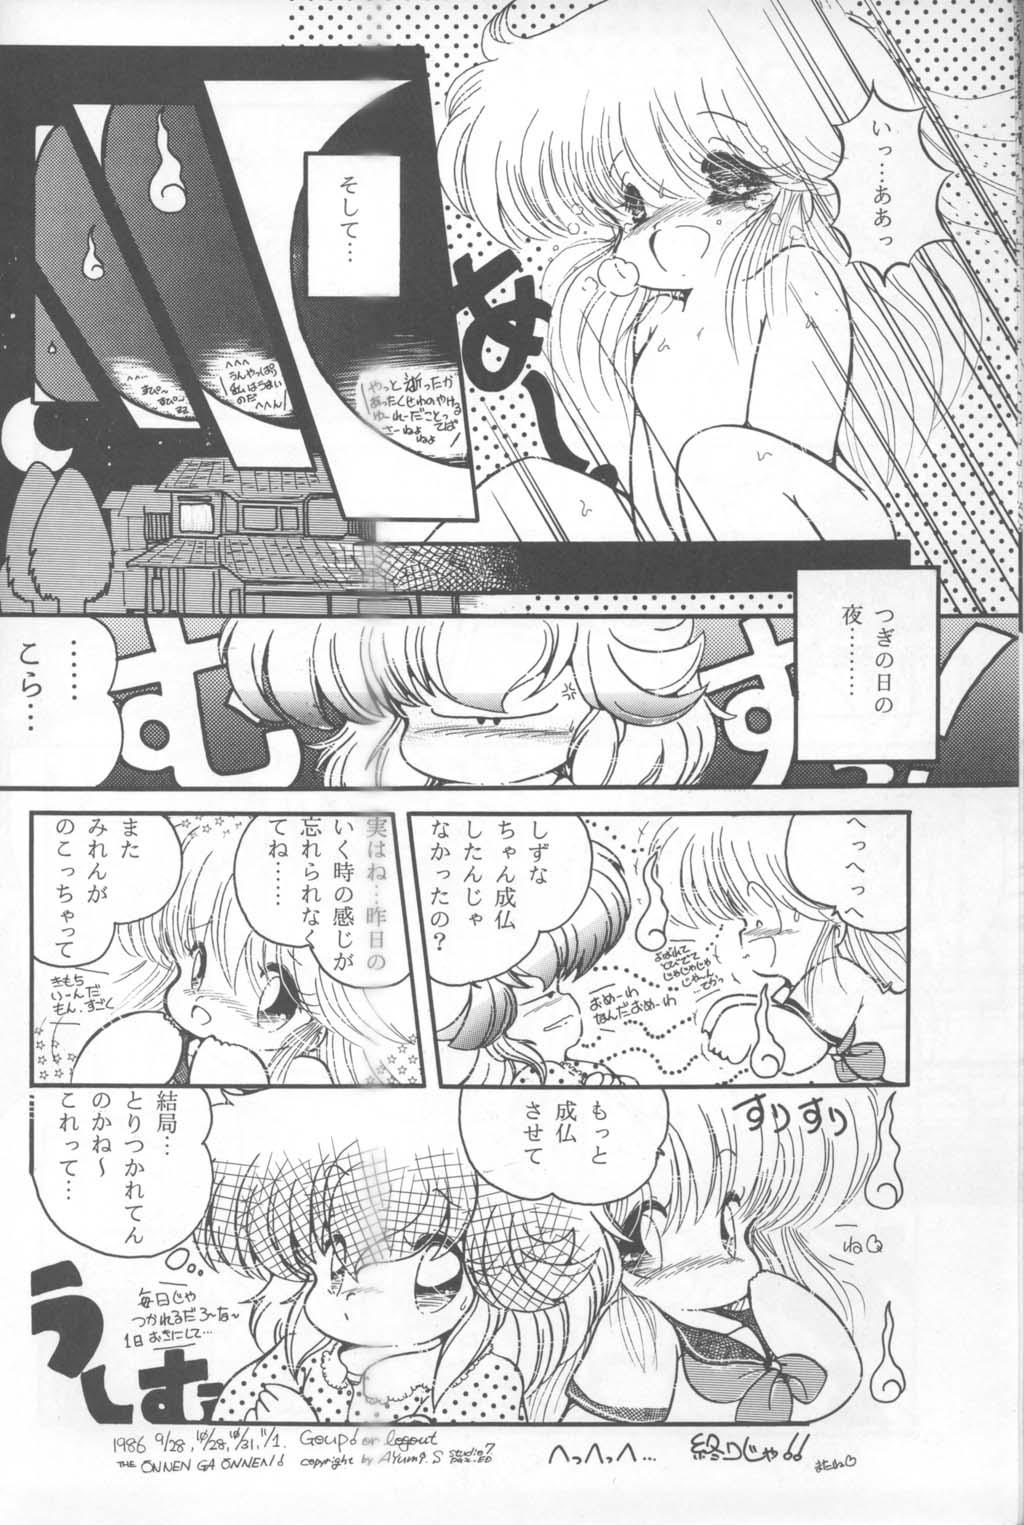  MEMORIES - Dirty pair Liveshow - Page 11